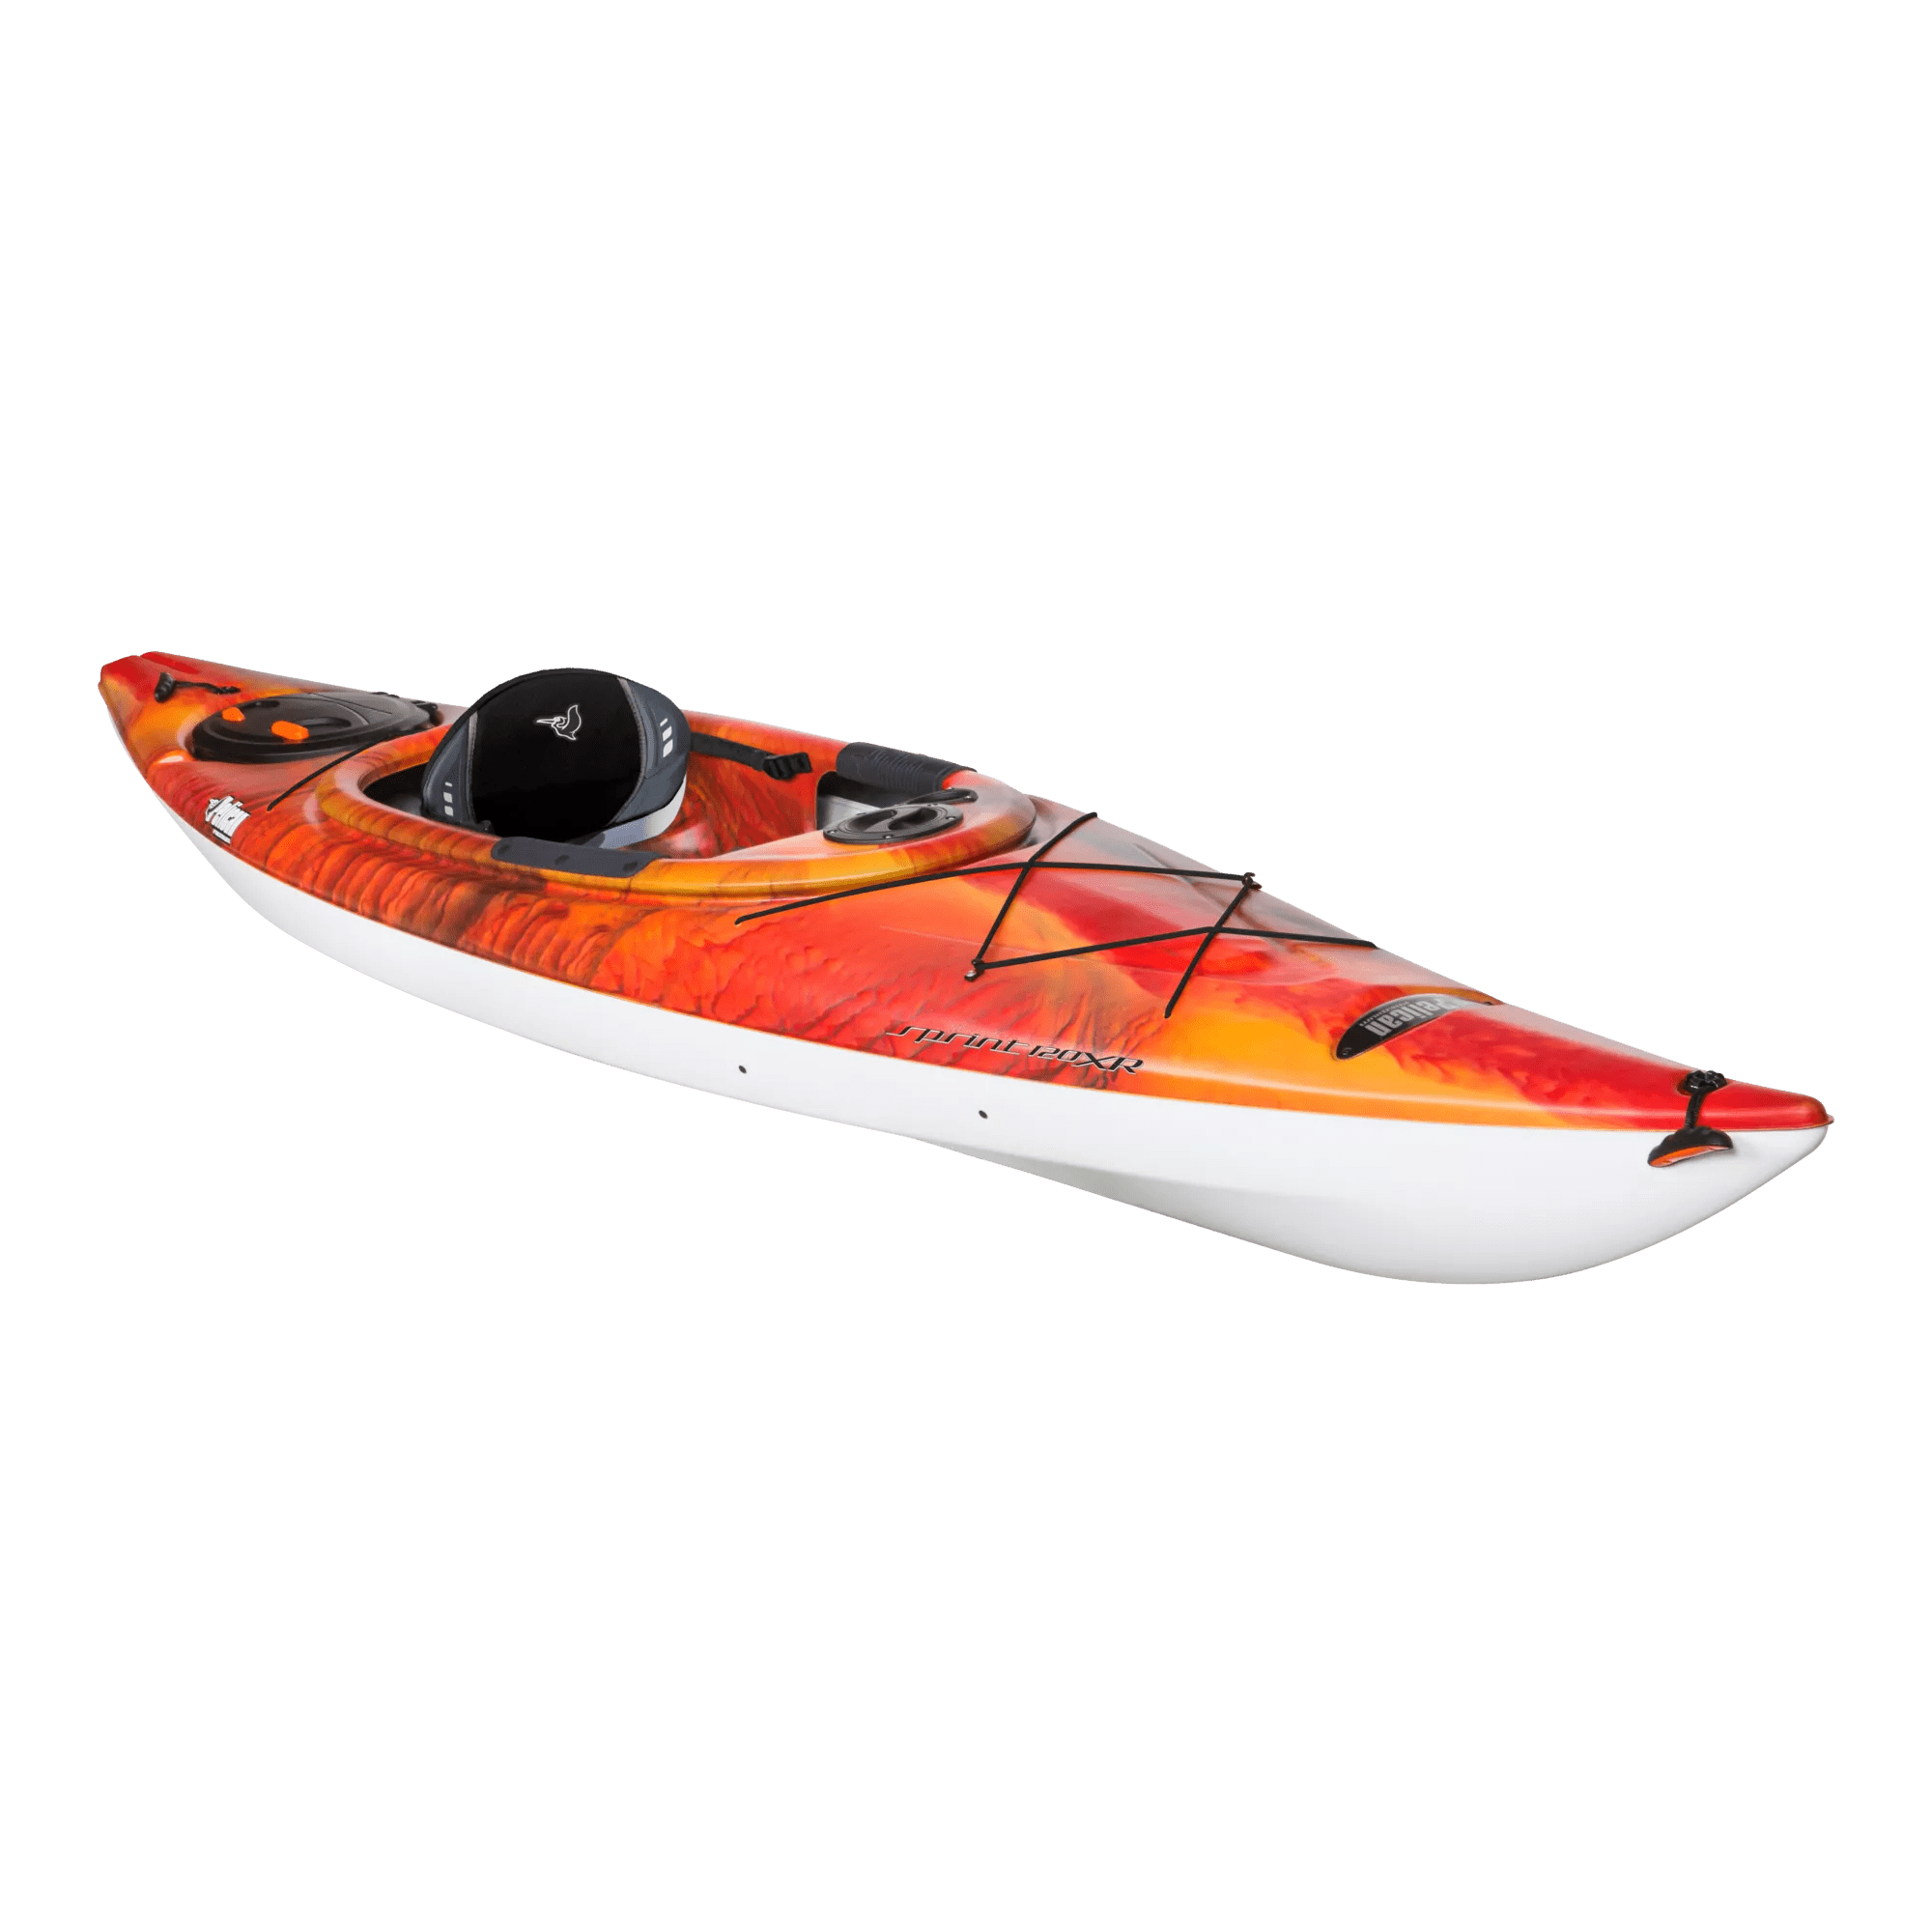 PELICAN - Sprint 120XR Performance Kayak - Discontinued - Red - KNP12P100-00 - ISO